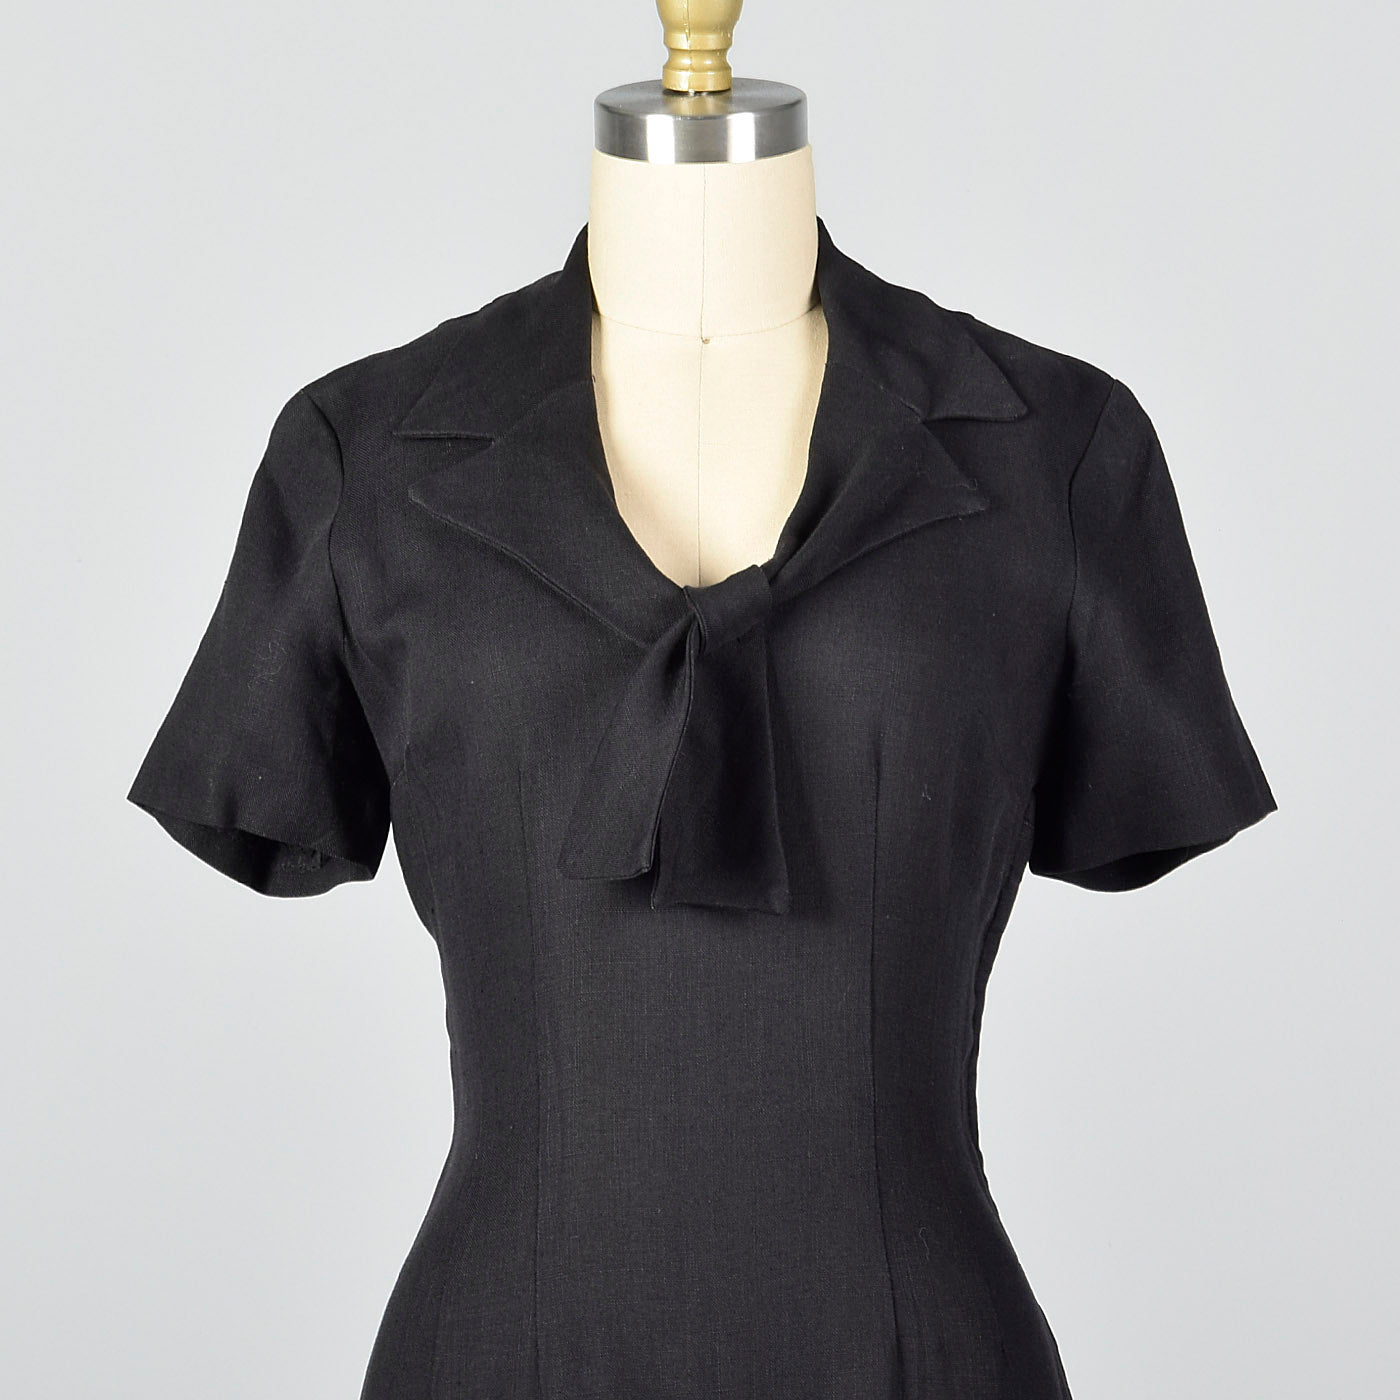 1950s Black Pencil Dress with Pussybow